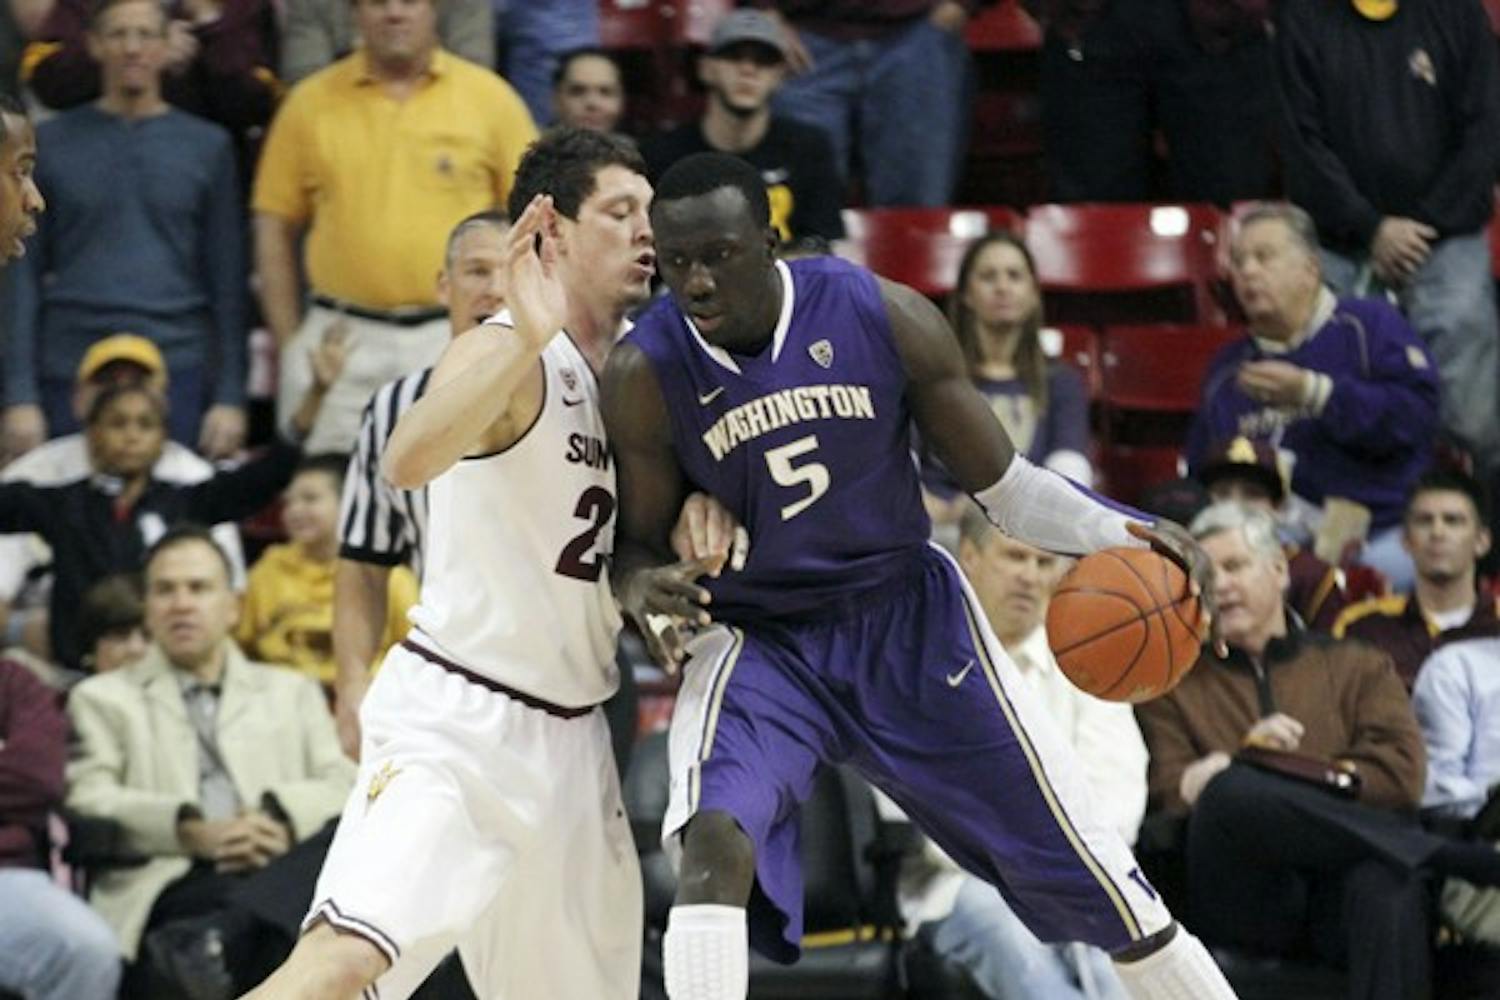 Washington forward Aziz N’Diaye (right) backs down Ruslan Pateev (left) in a game against ASU on Jan. 26. The Huskies are one of the most talented teams in the Pac-12. (Photo by Sam Rosenbaum)